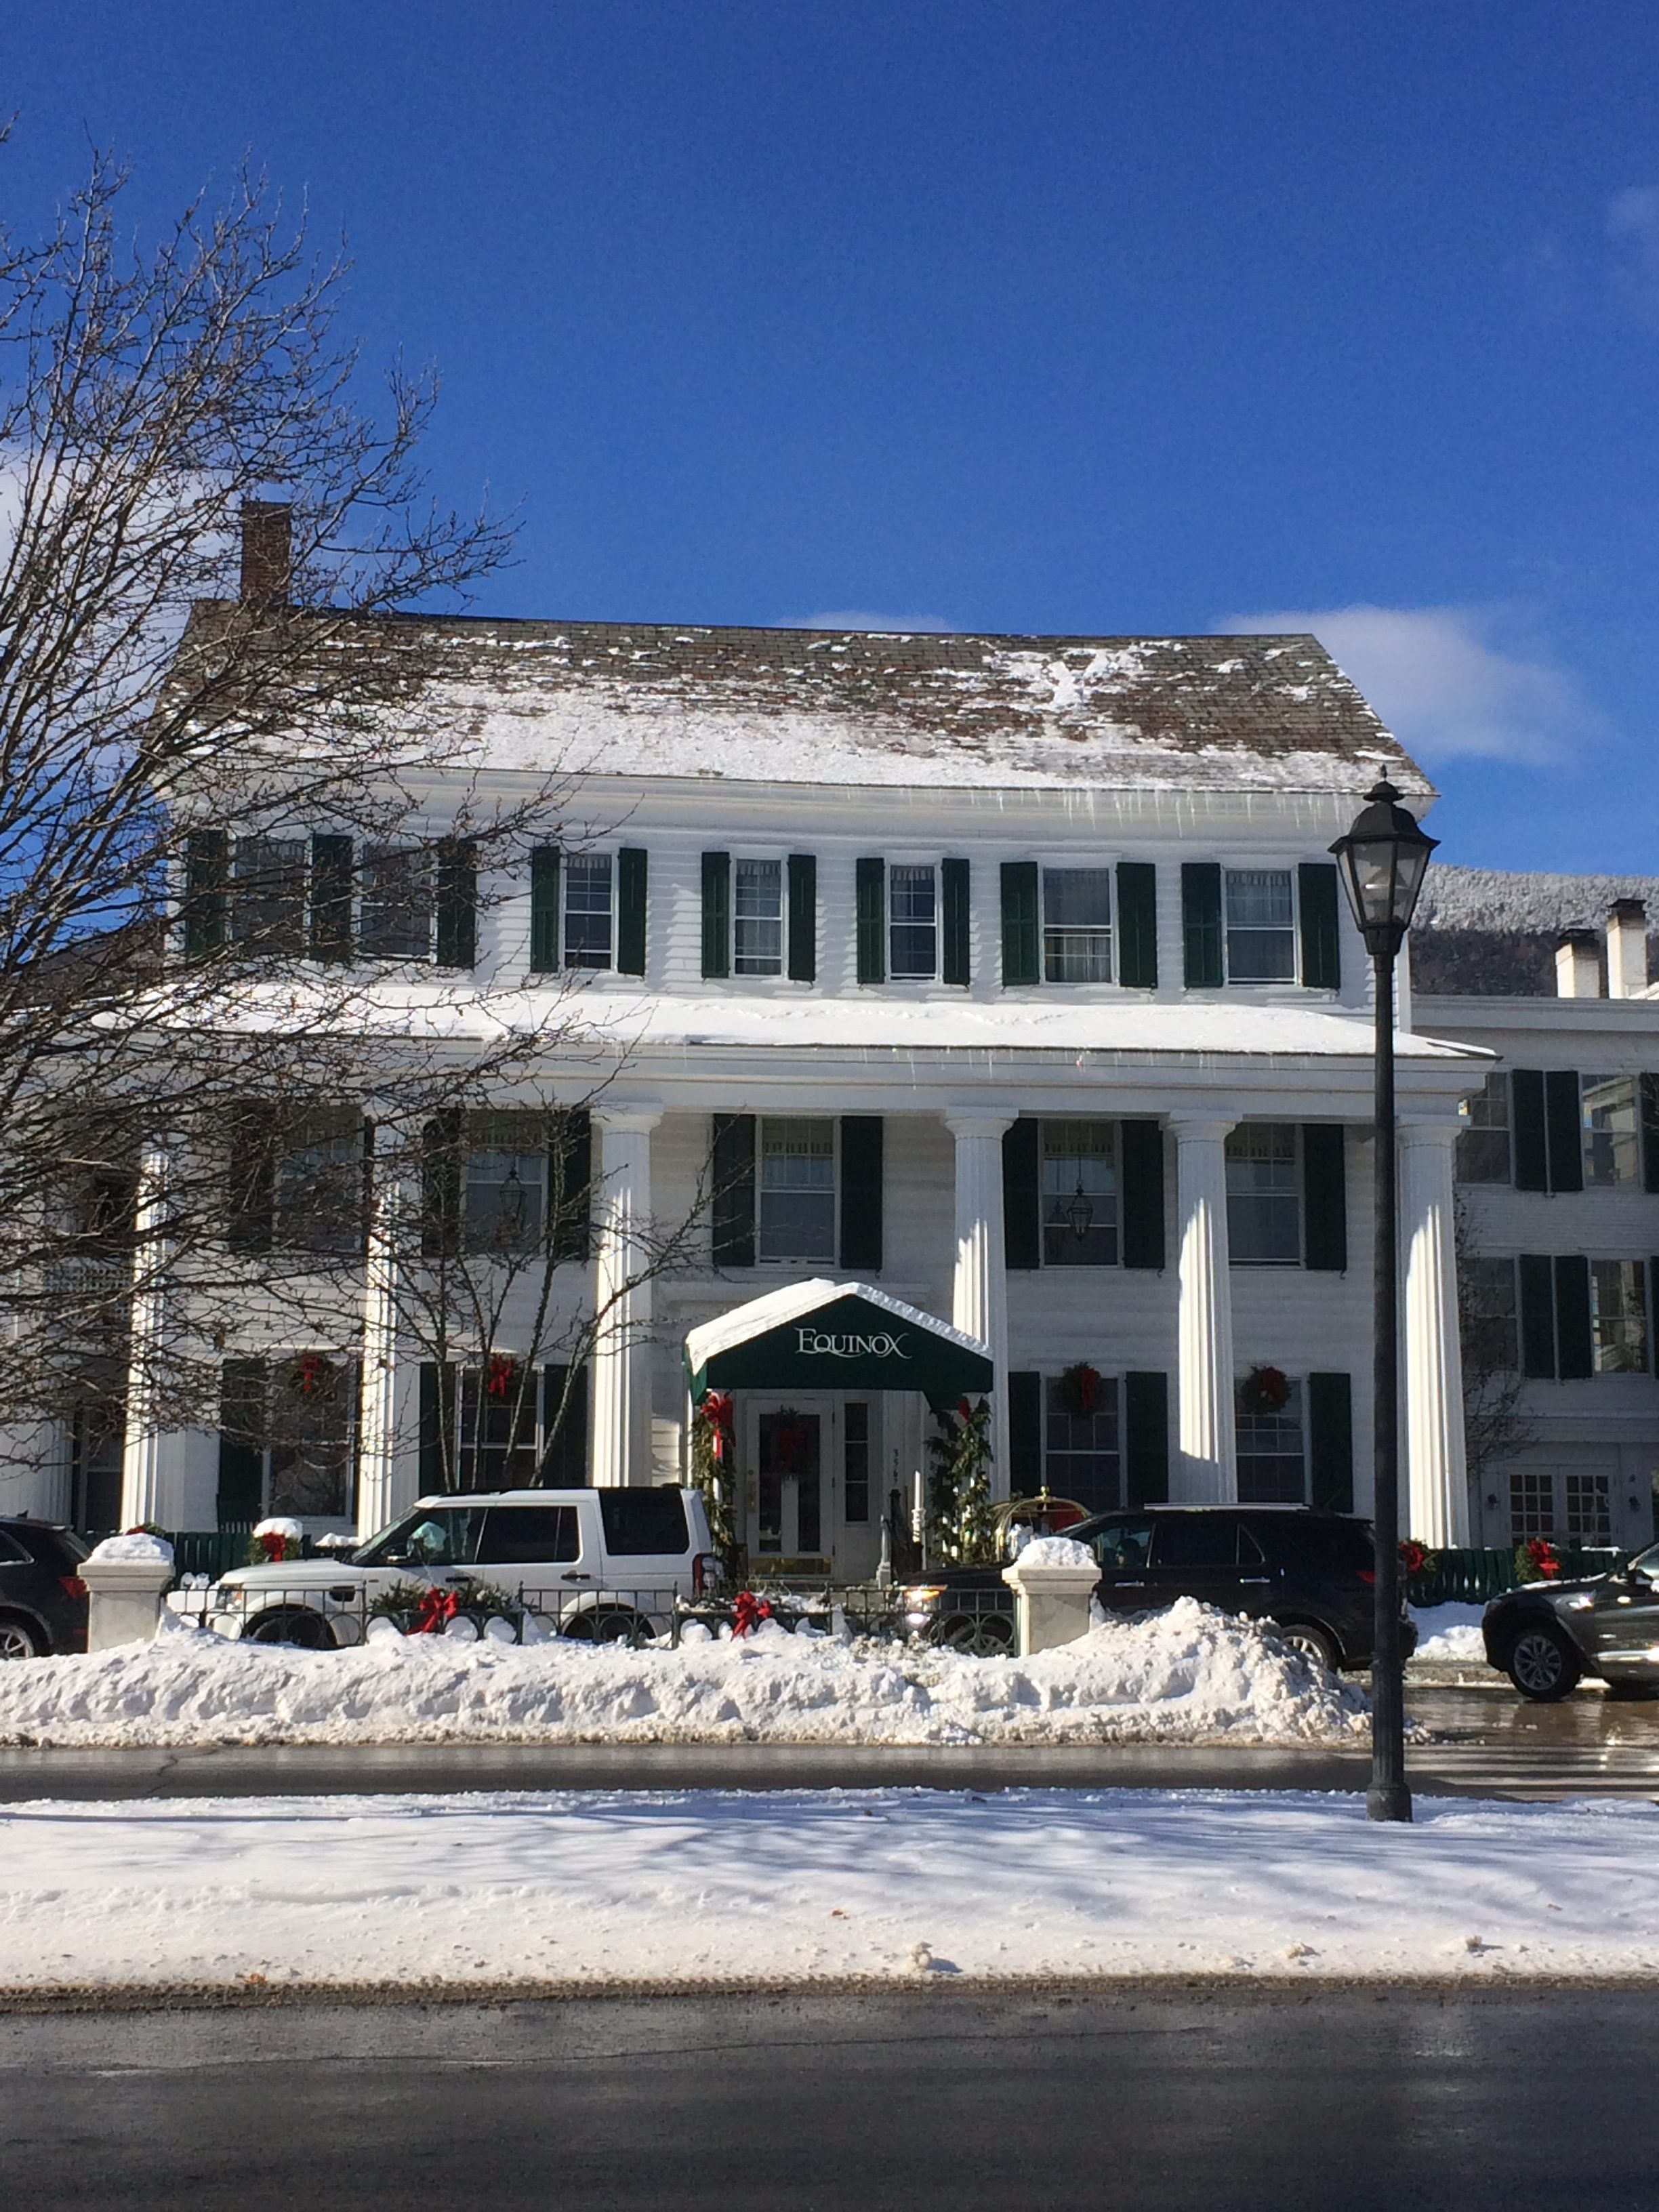 A One Night Stay at the Historic Equinox Resort in Vermont!